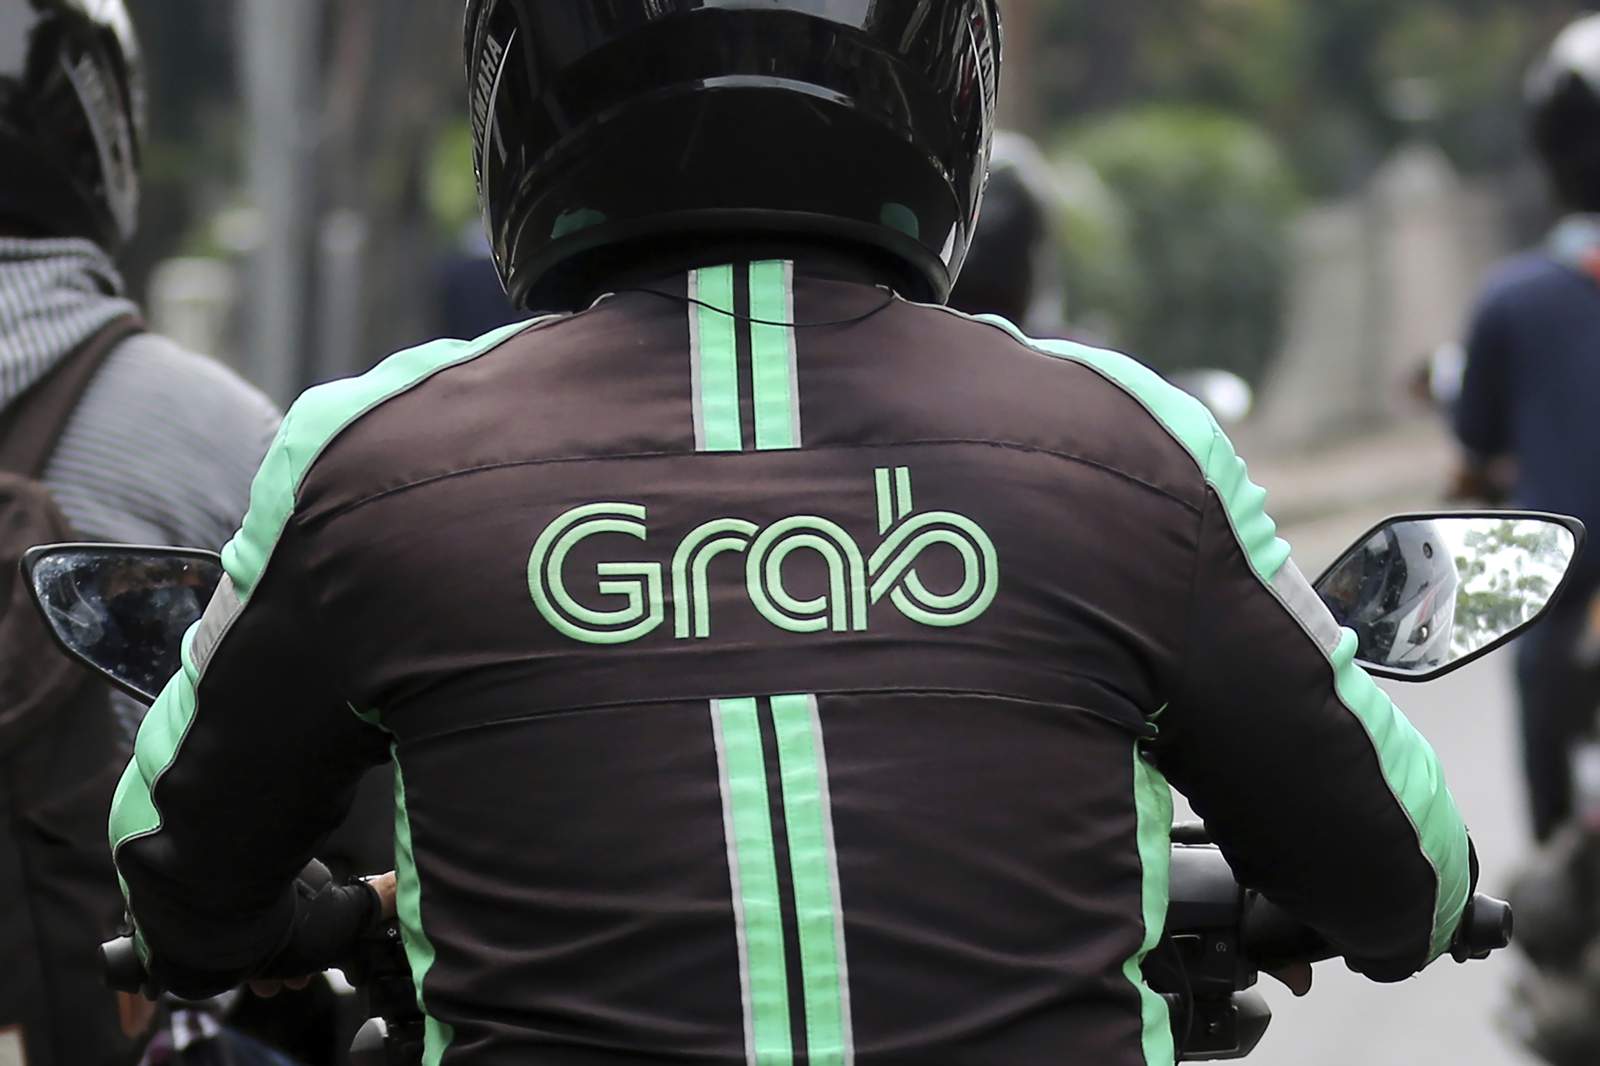 Grab to list in US via $40 bln merger with Altimeter Growth